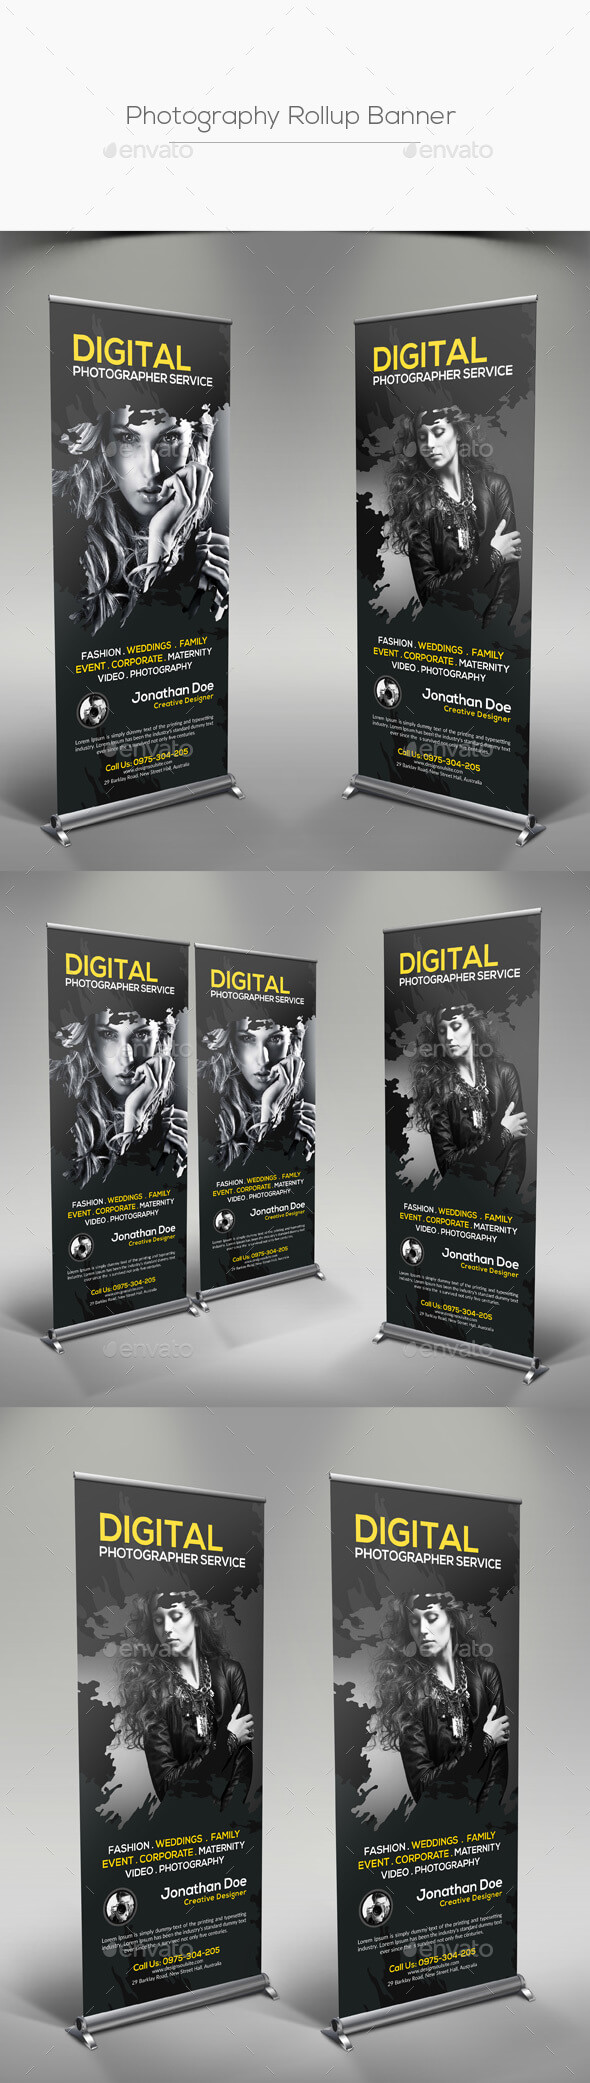 Photography Roll Up Banner Graphics, Designs & Templates For Photography Banner Template